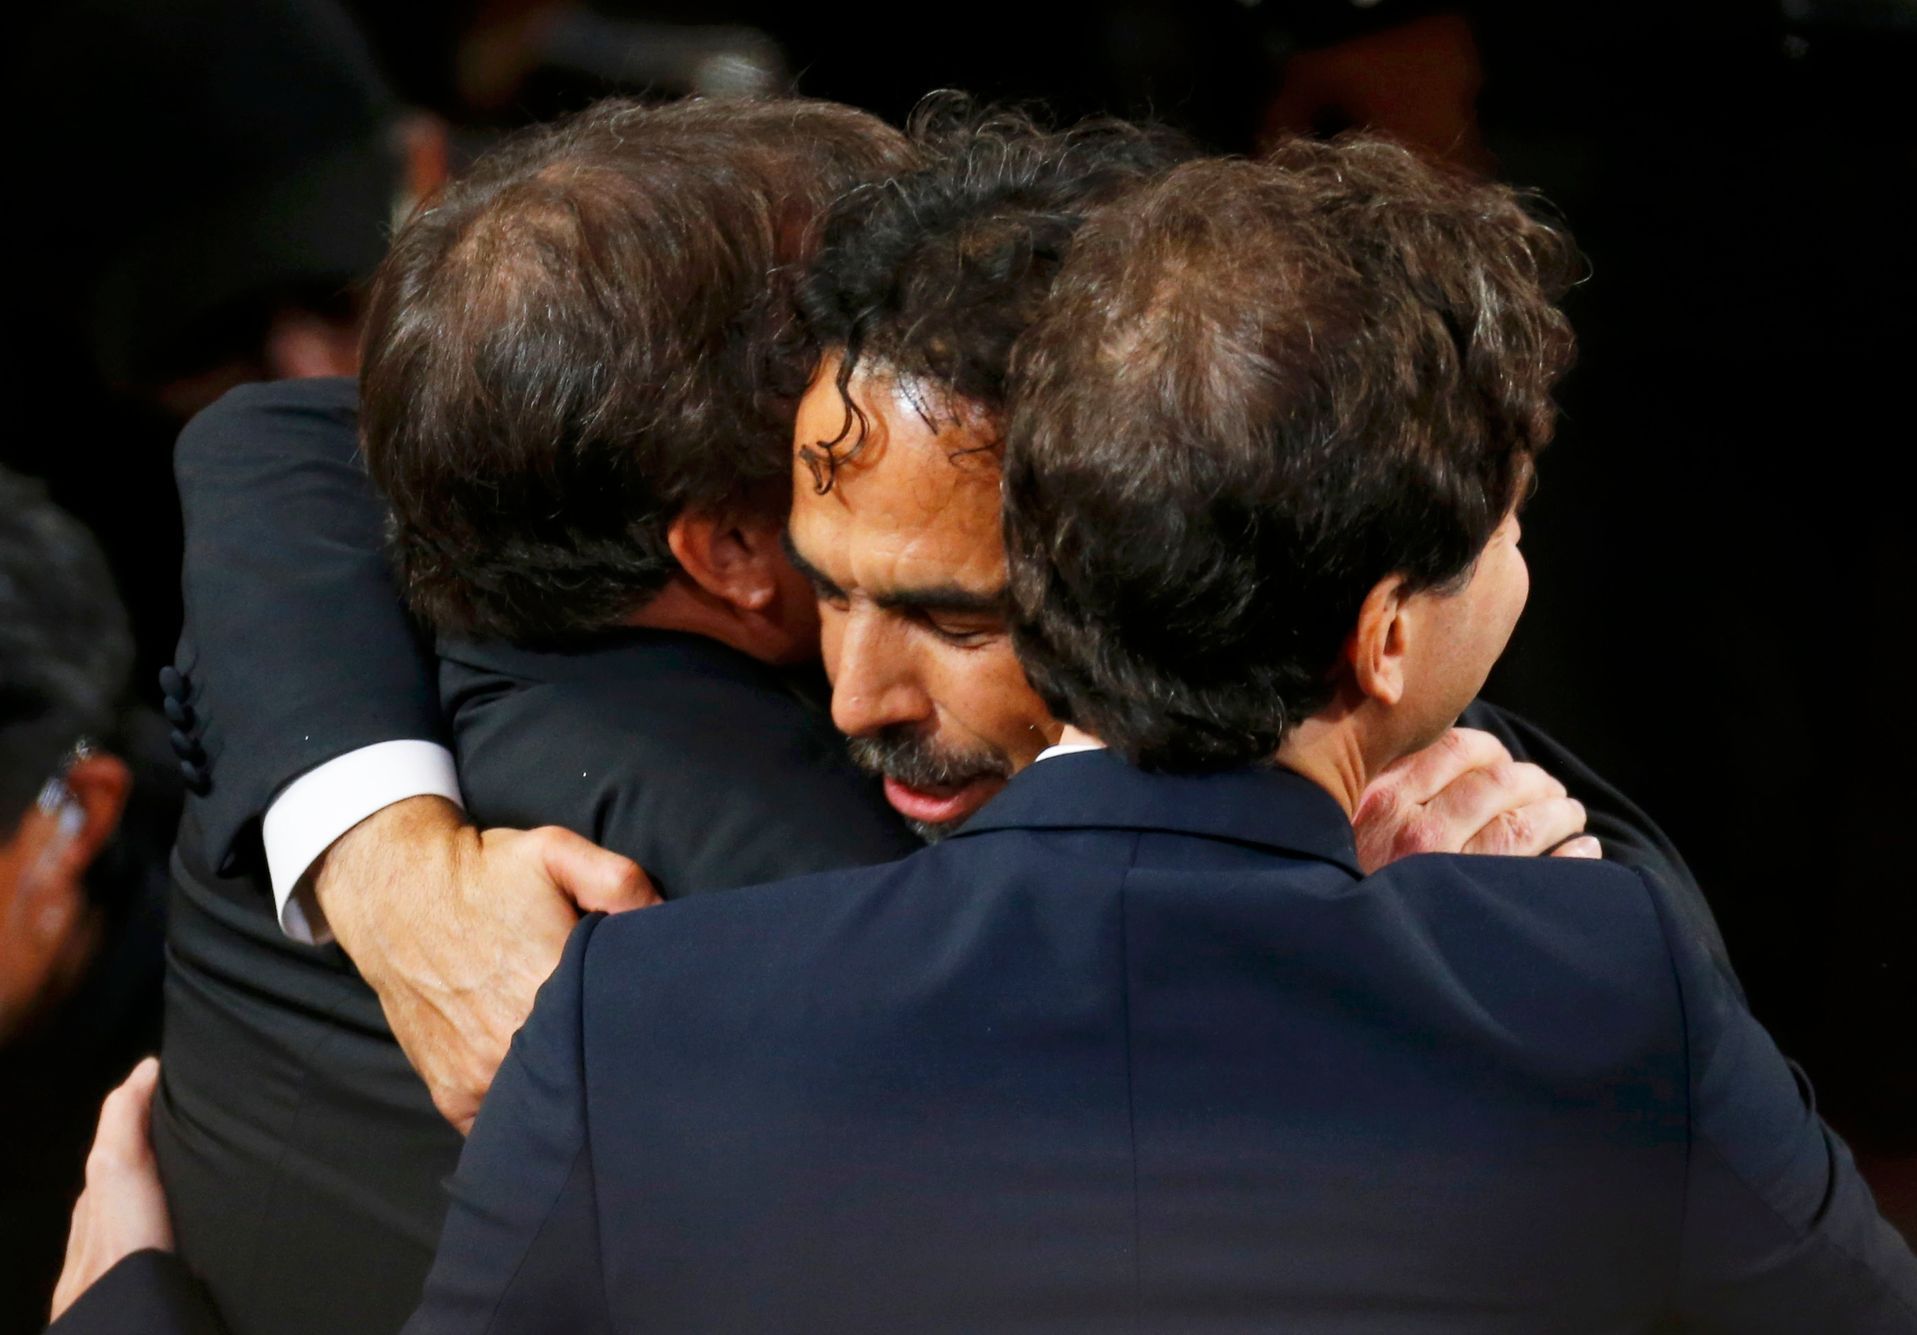 Director Inarritu is embraced as he walks to accept the Oscar for best director at the 87th Academy Awards in Hollywood